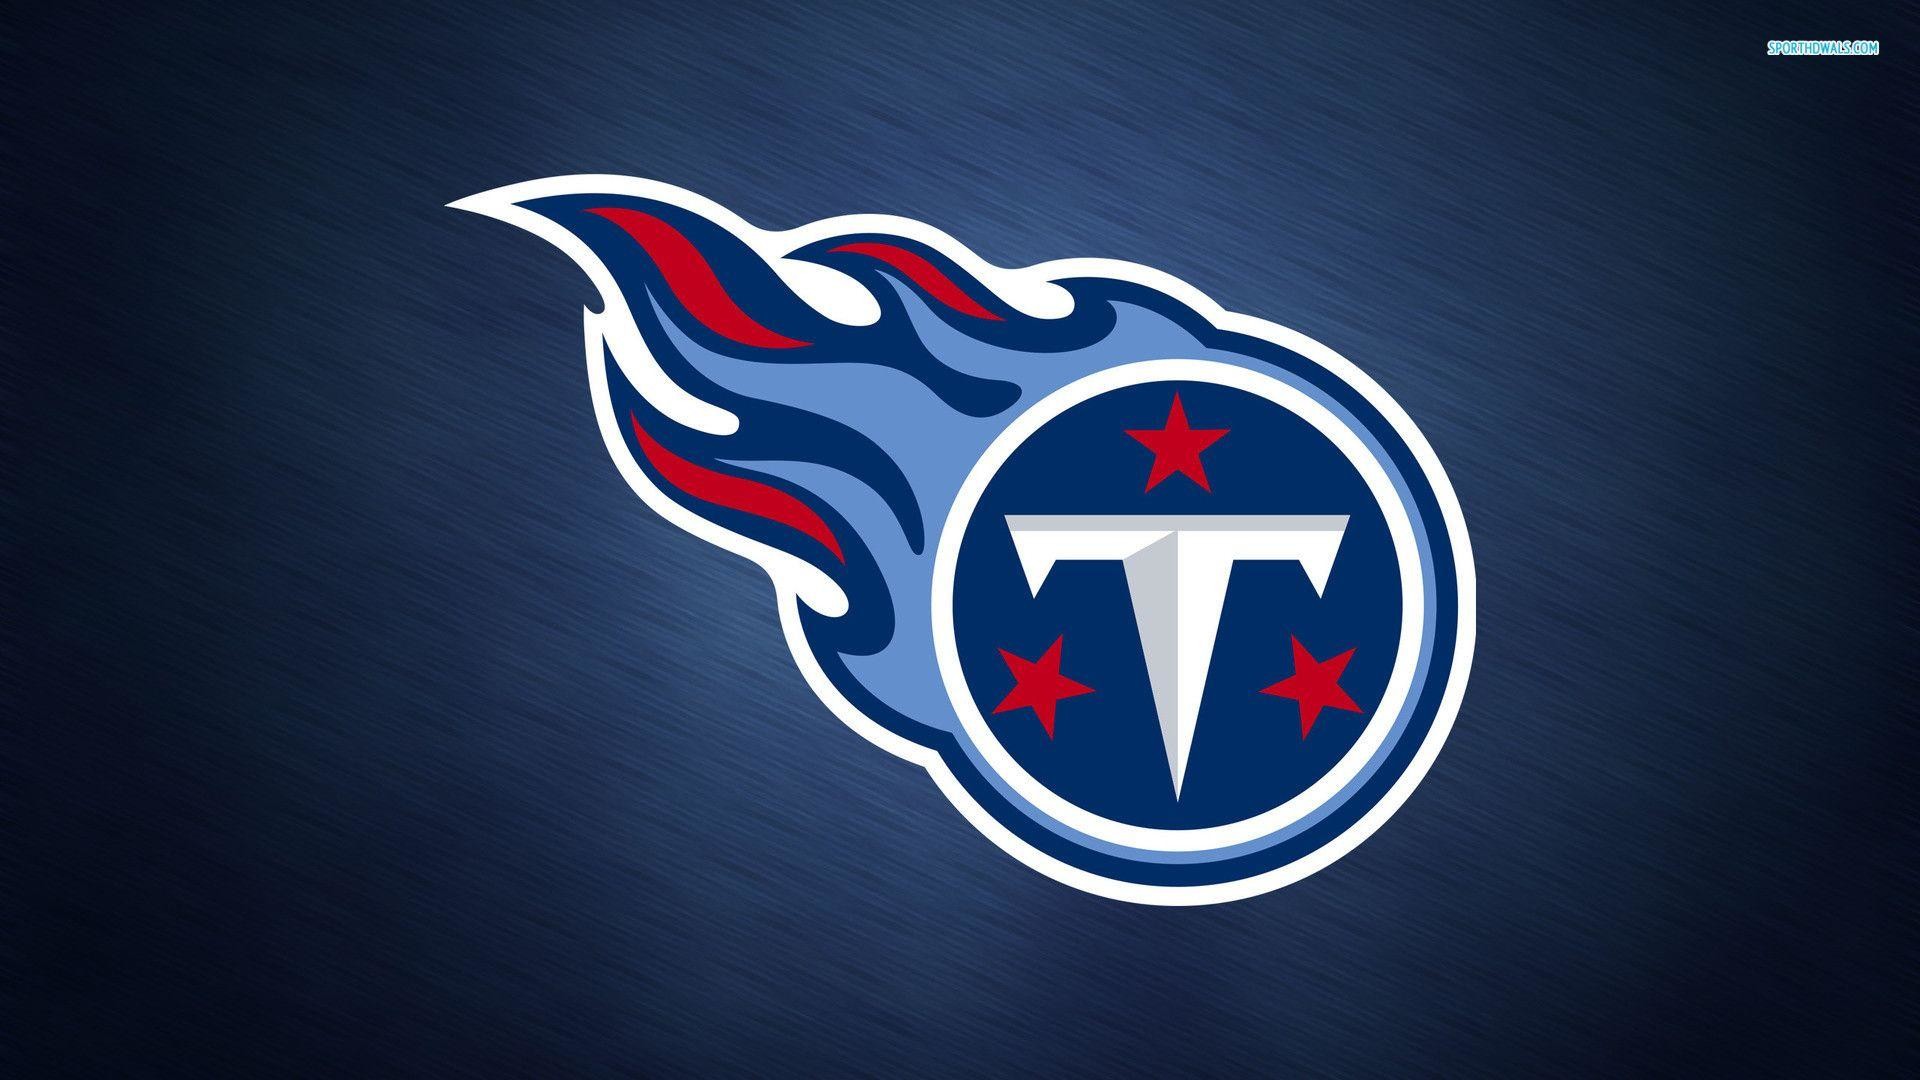 1920x1080 tennessee titans wallpapers wallpaper cave rh wallpapercave com Houston  Texans Wallpaper Free Tennessee Titans Helmet Wallpaper